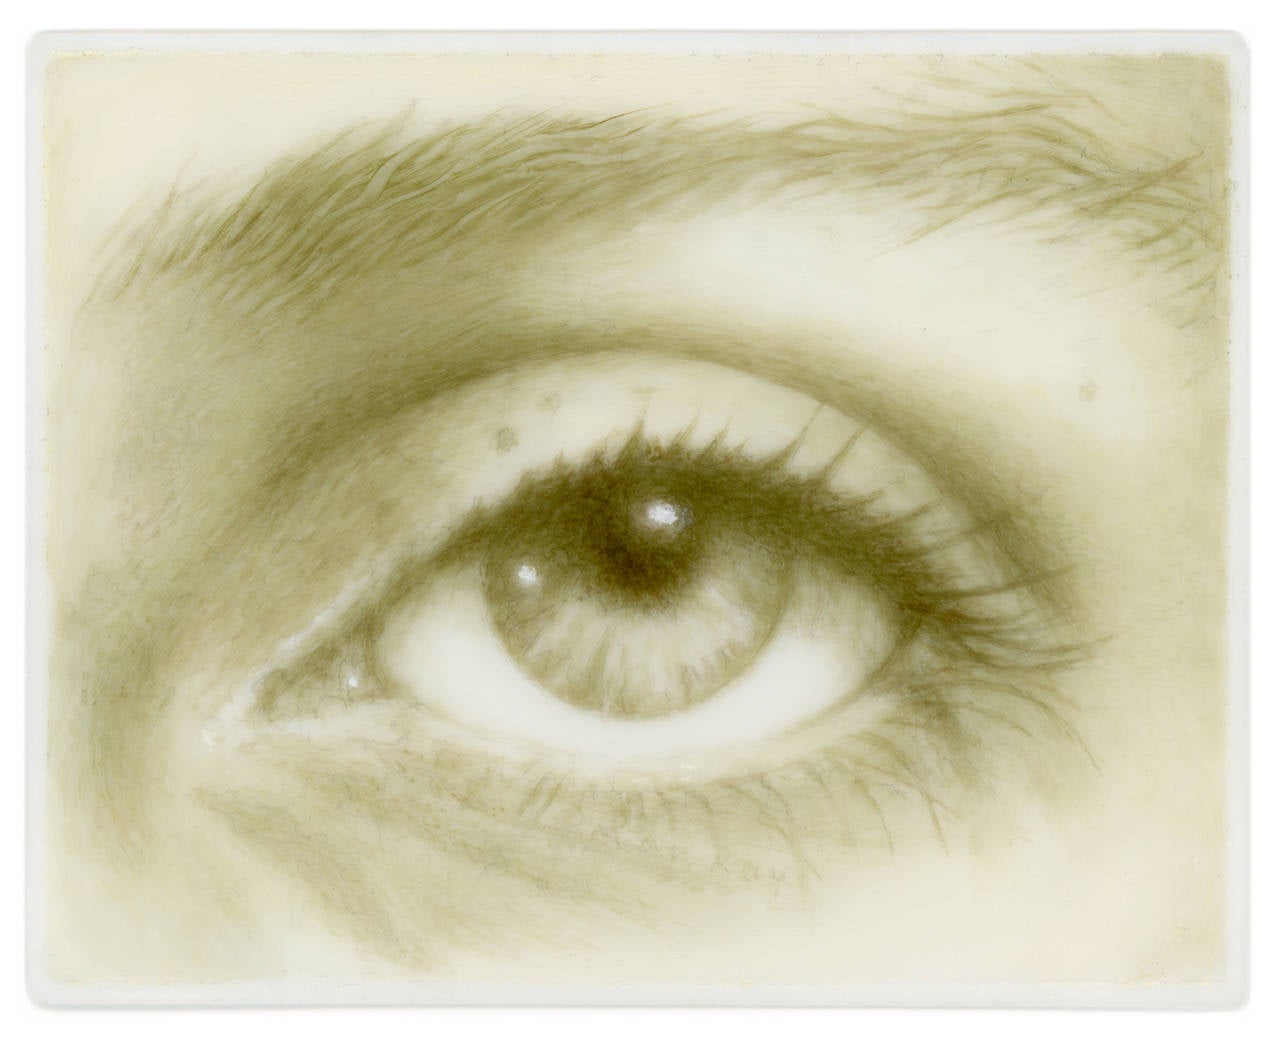 Lover's Eye III: Lee II (after Man Ray) - Painting by Tabitha Vevers